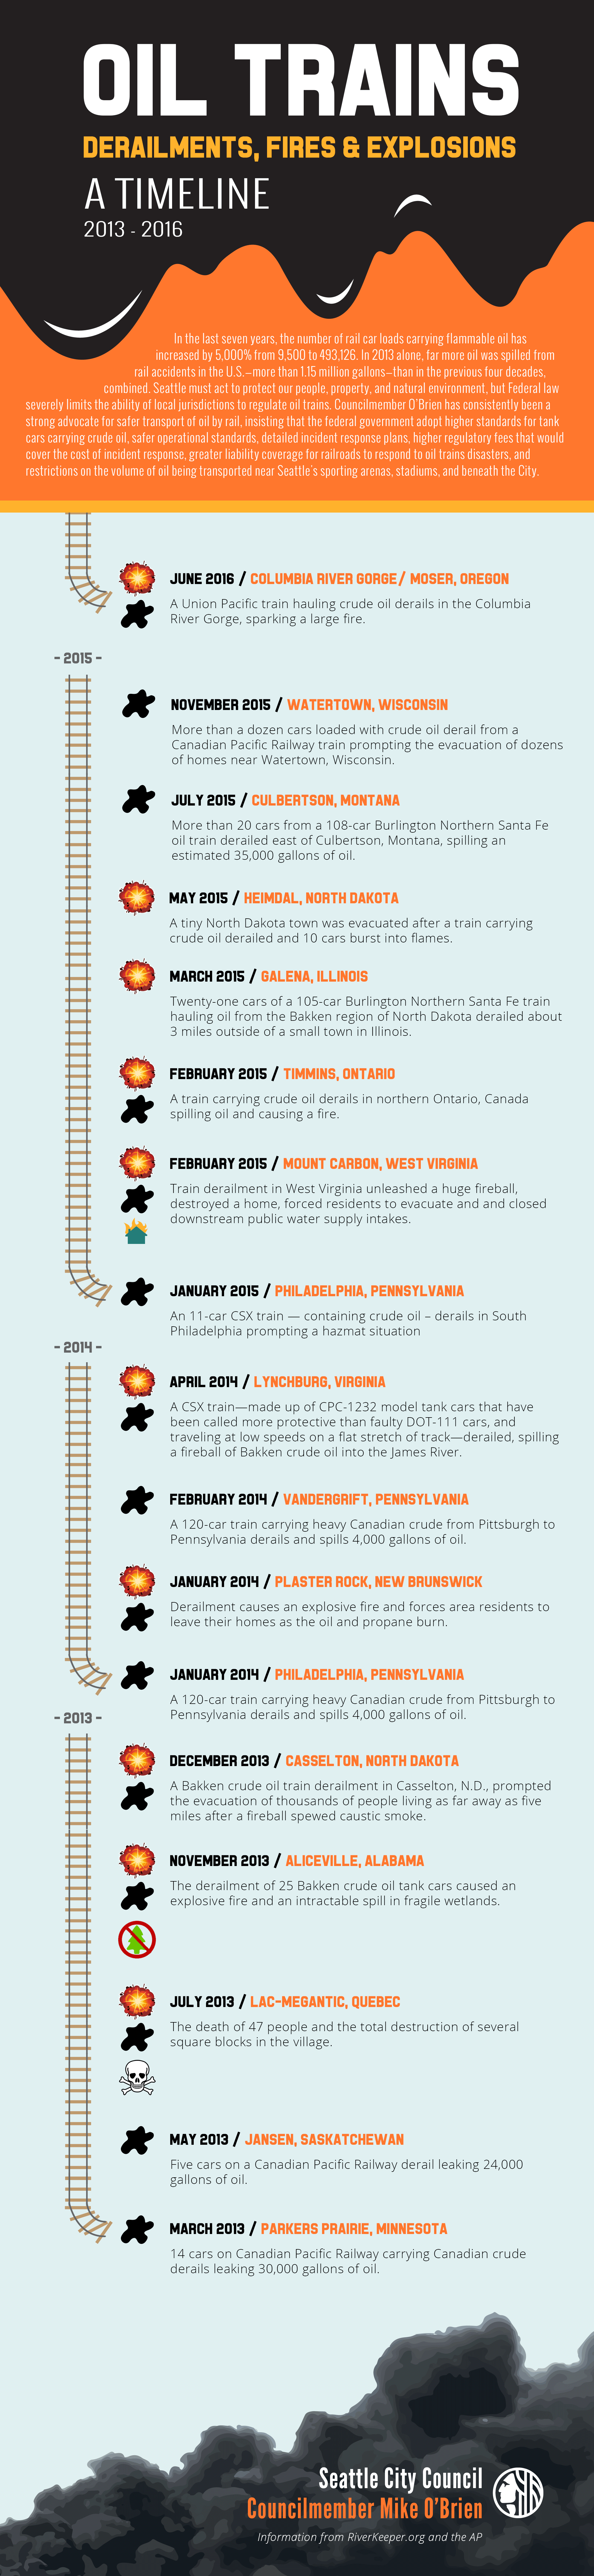 Oil Trains Timeline Infographic